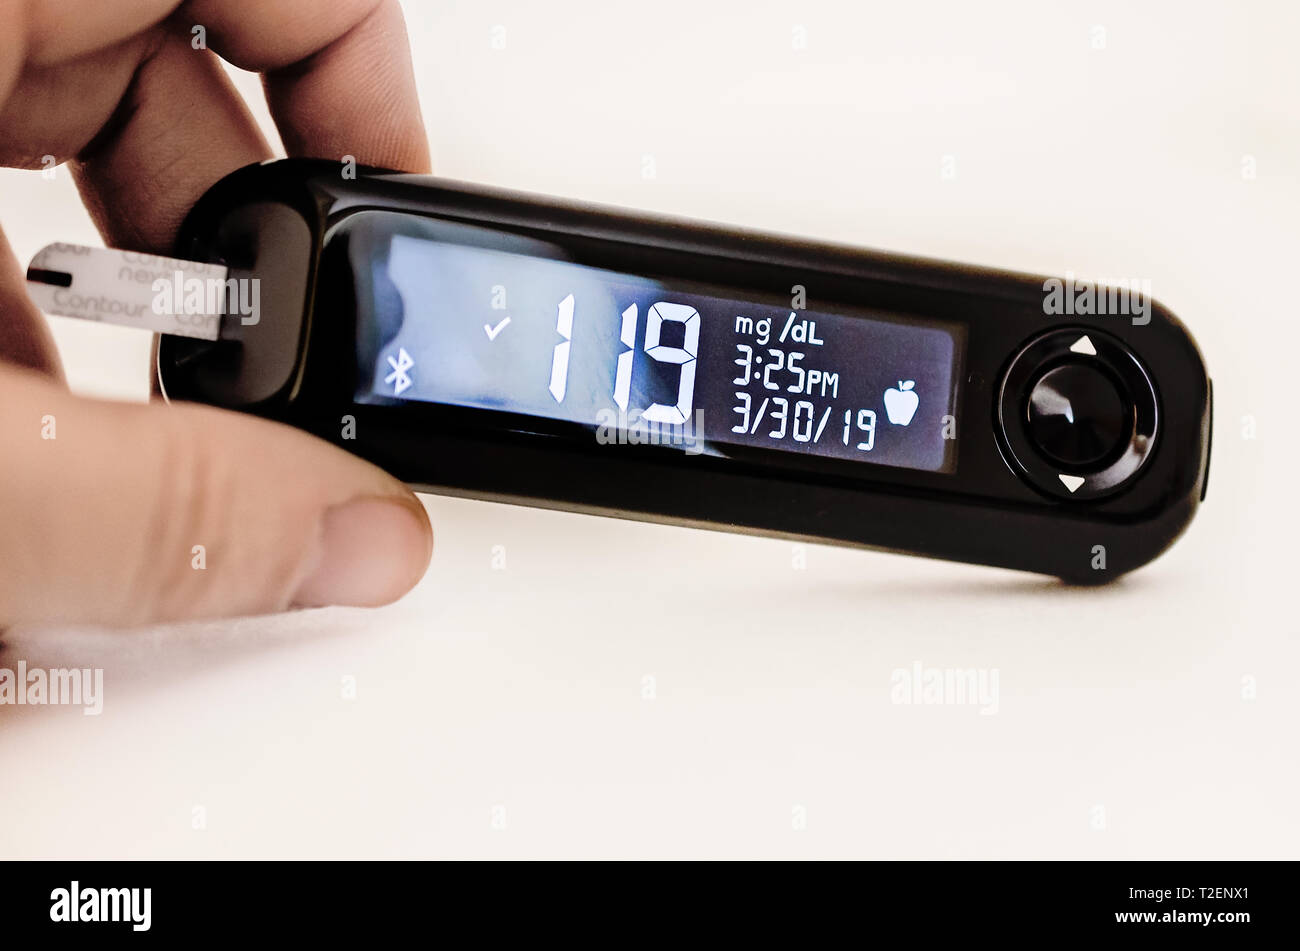 A hand holds a Contour Next blood glucose meter indicating a high blood sugar reading of 119 before a meal. Stock Photo